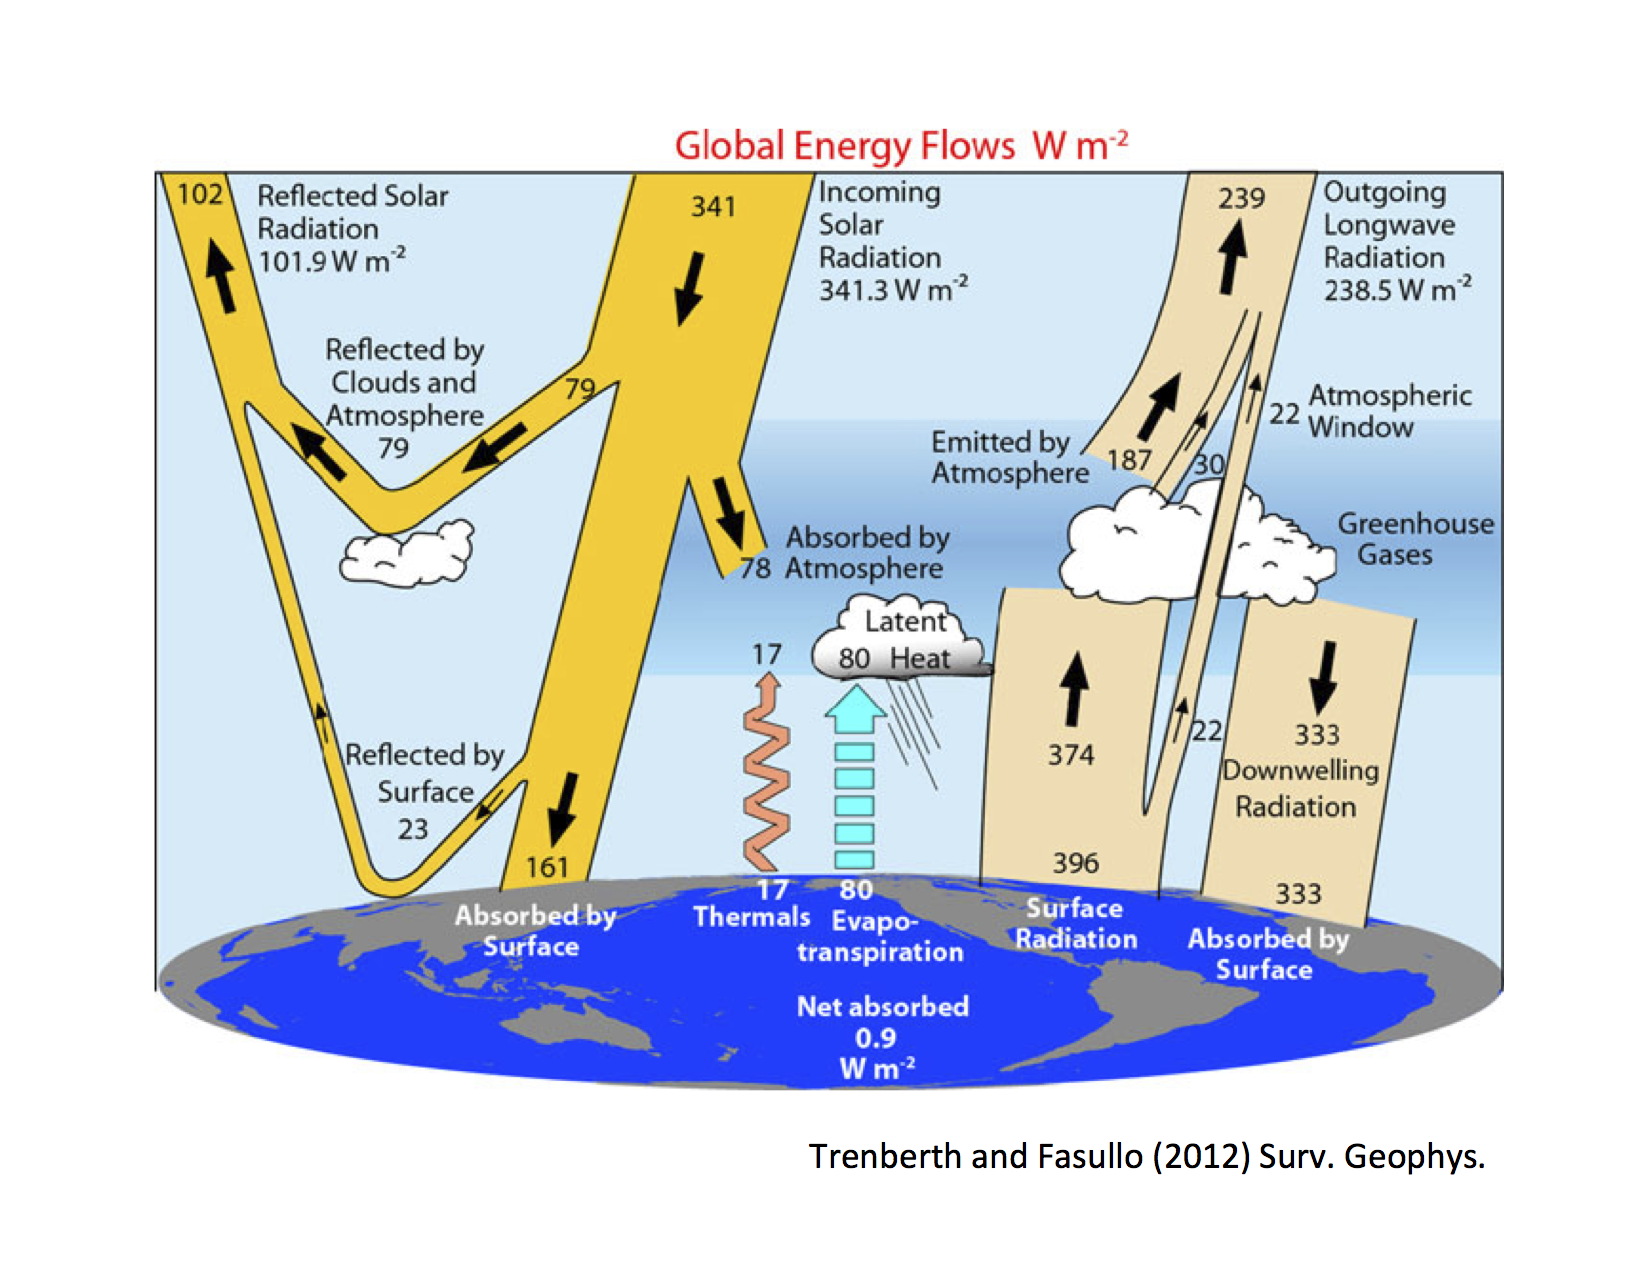 Observed global energy flows from Trenberth and Fasullo (2012)